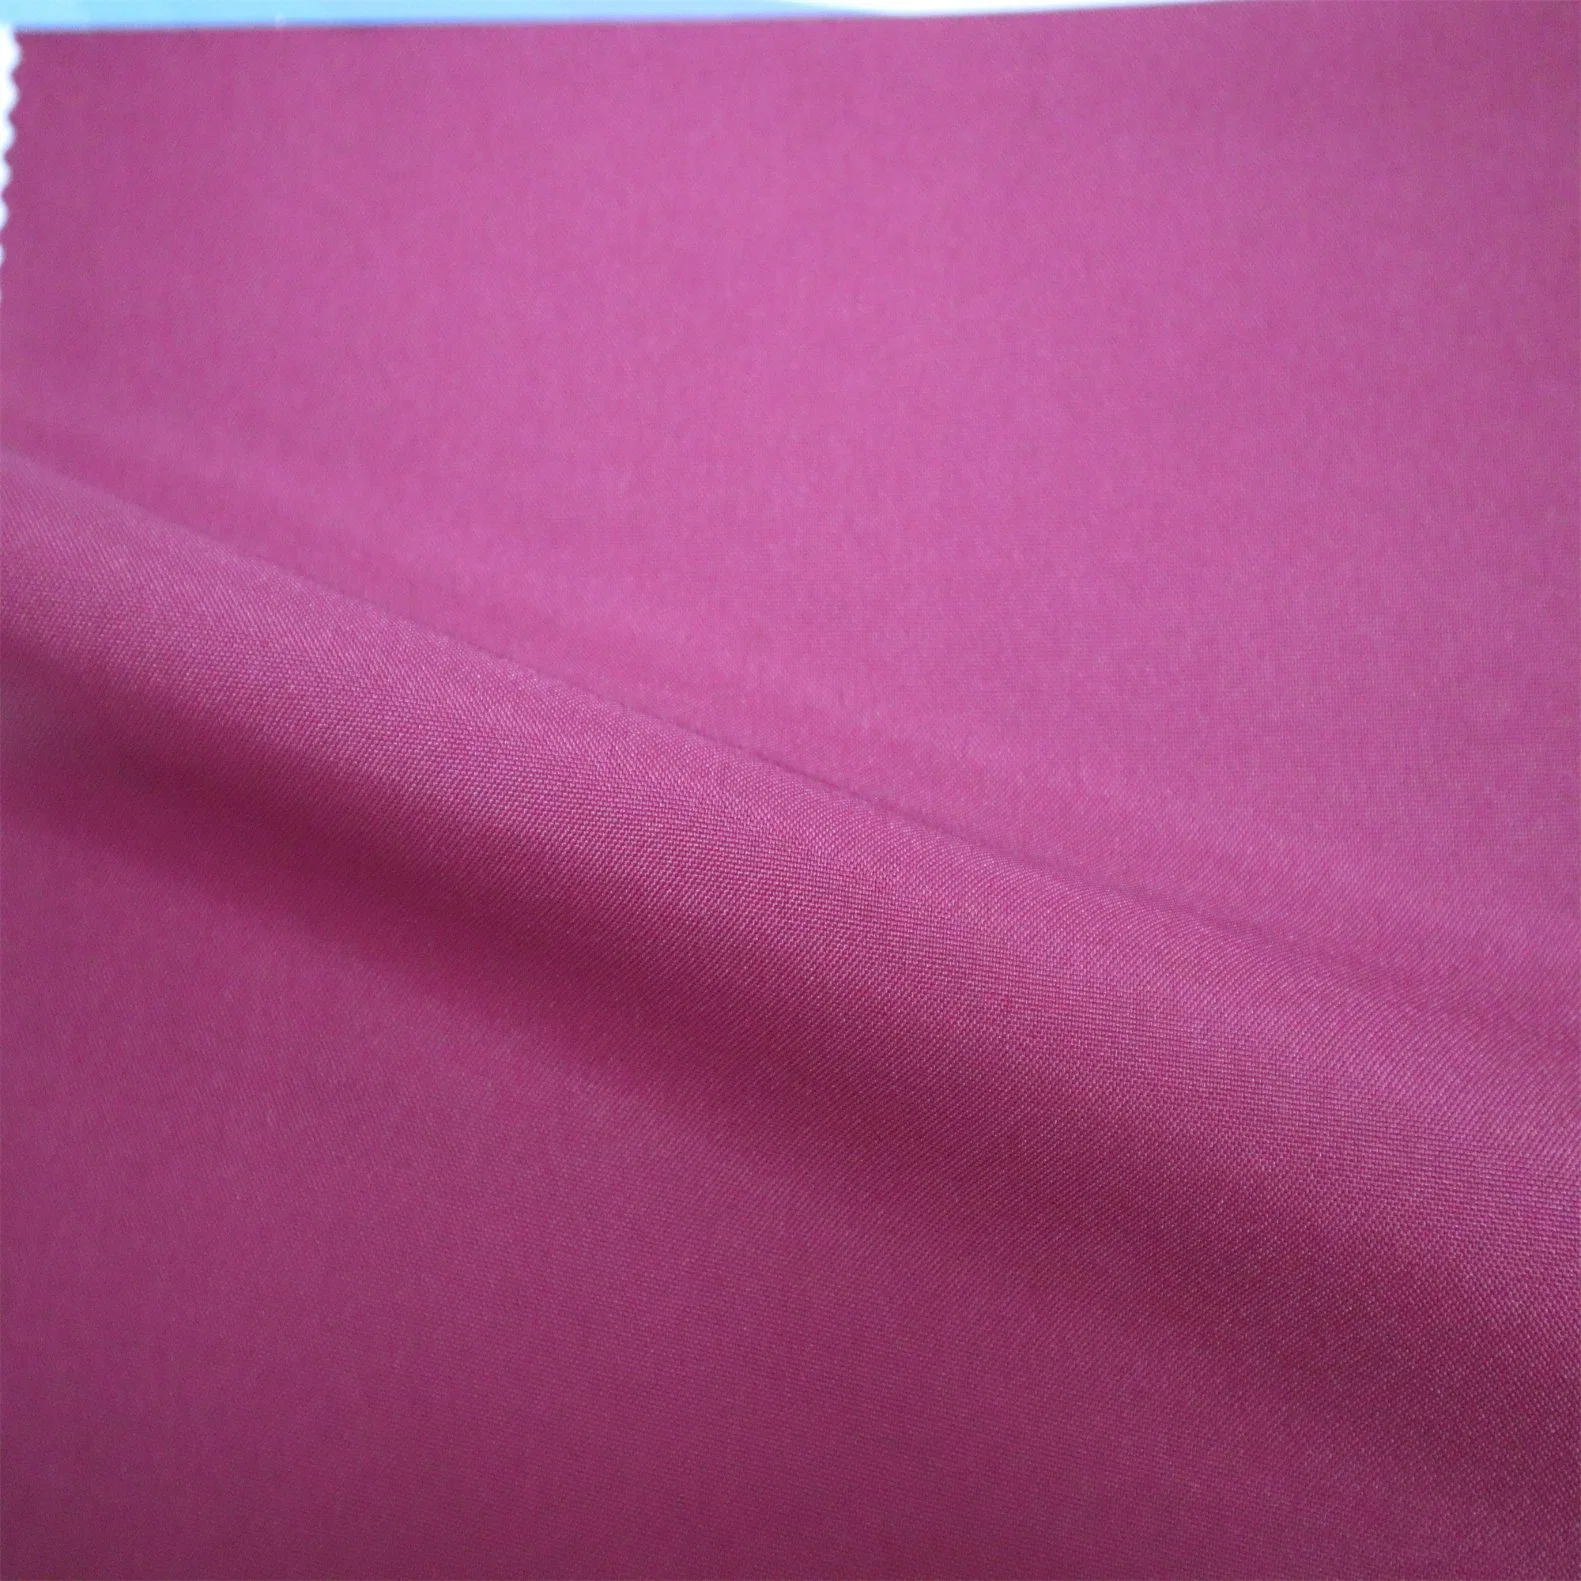 Breathable Comfortable Knitted 300d Recycle Polyester Mesh Plain Fabric for Sport Yoga Garment